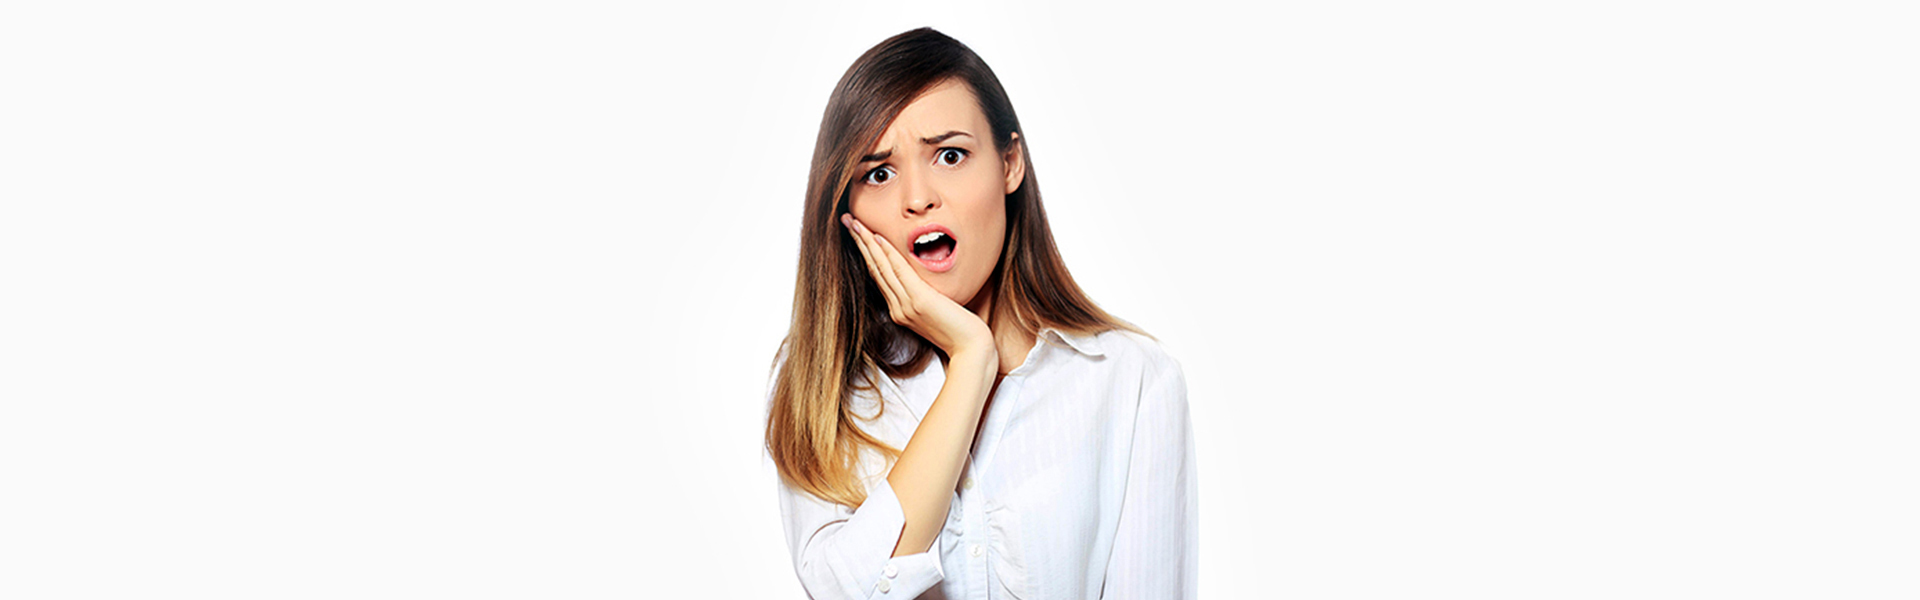 Wisdom Teeth Removal – Procedure, Recovery, and Expectations